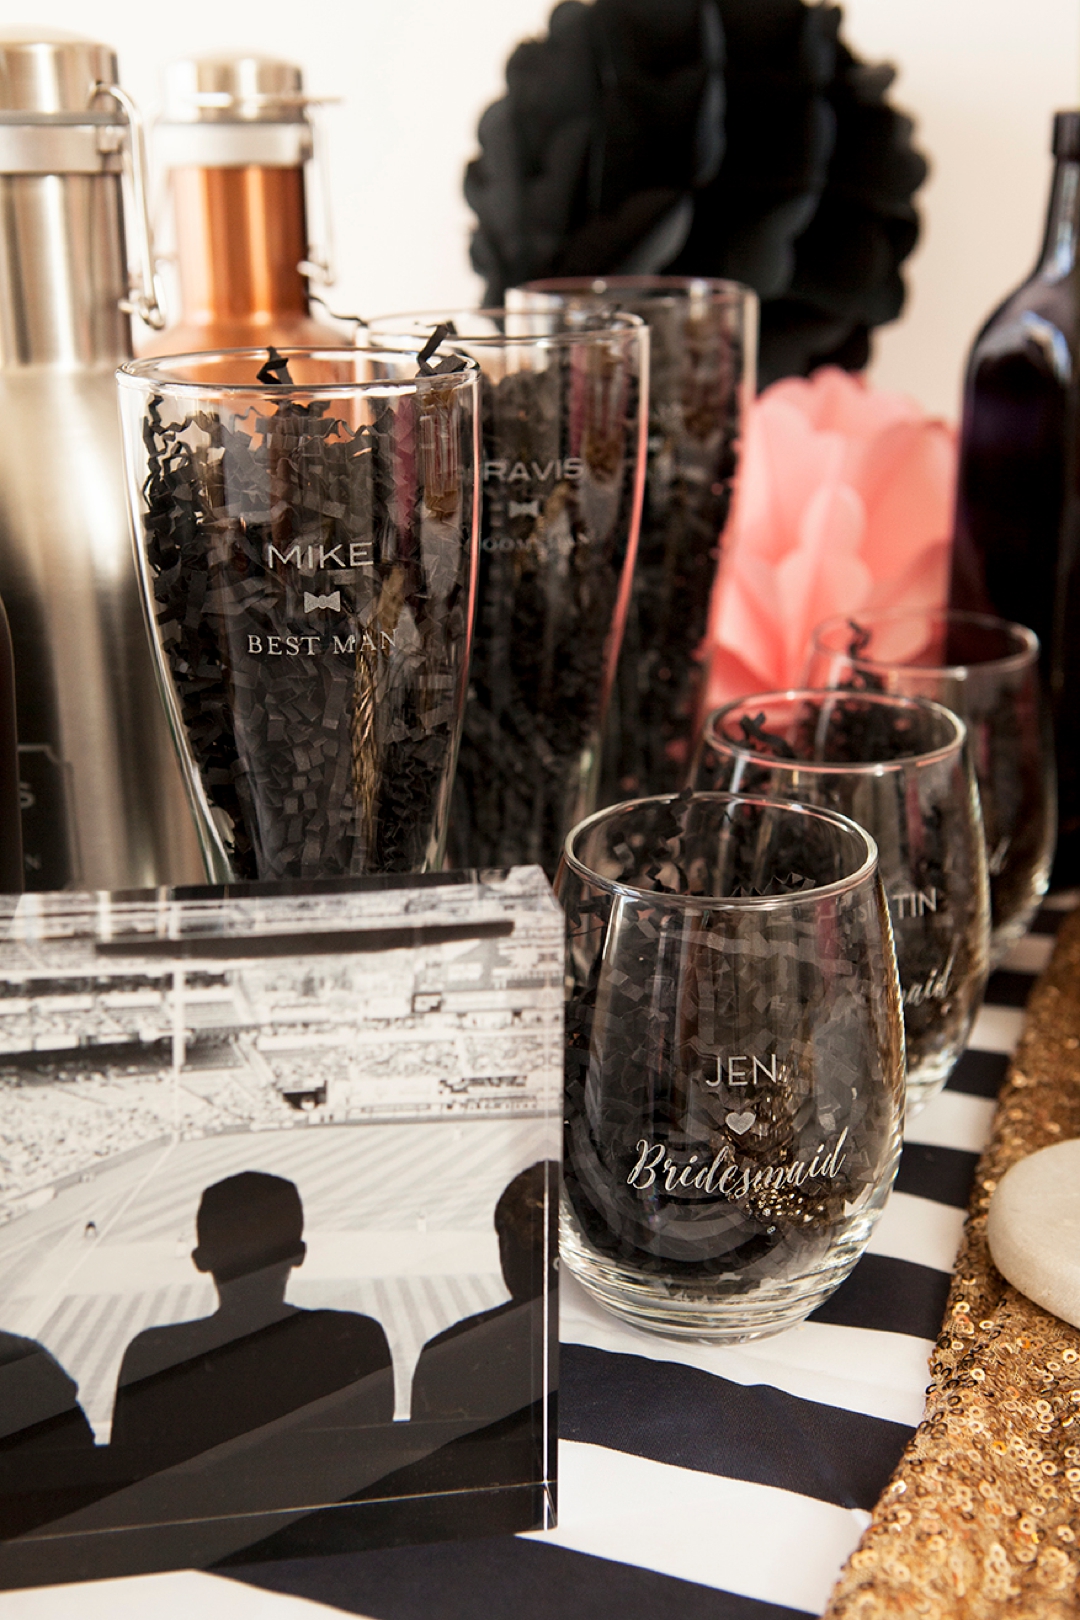 Personalized wine glasses and pilsner glasses for your bridal party!